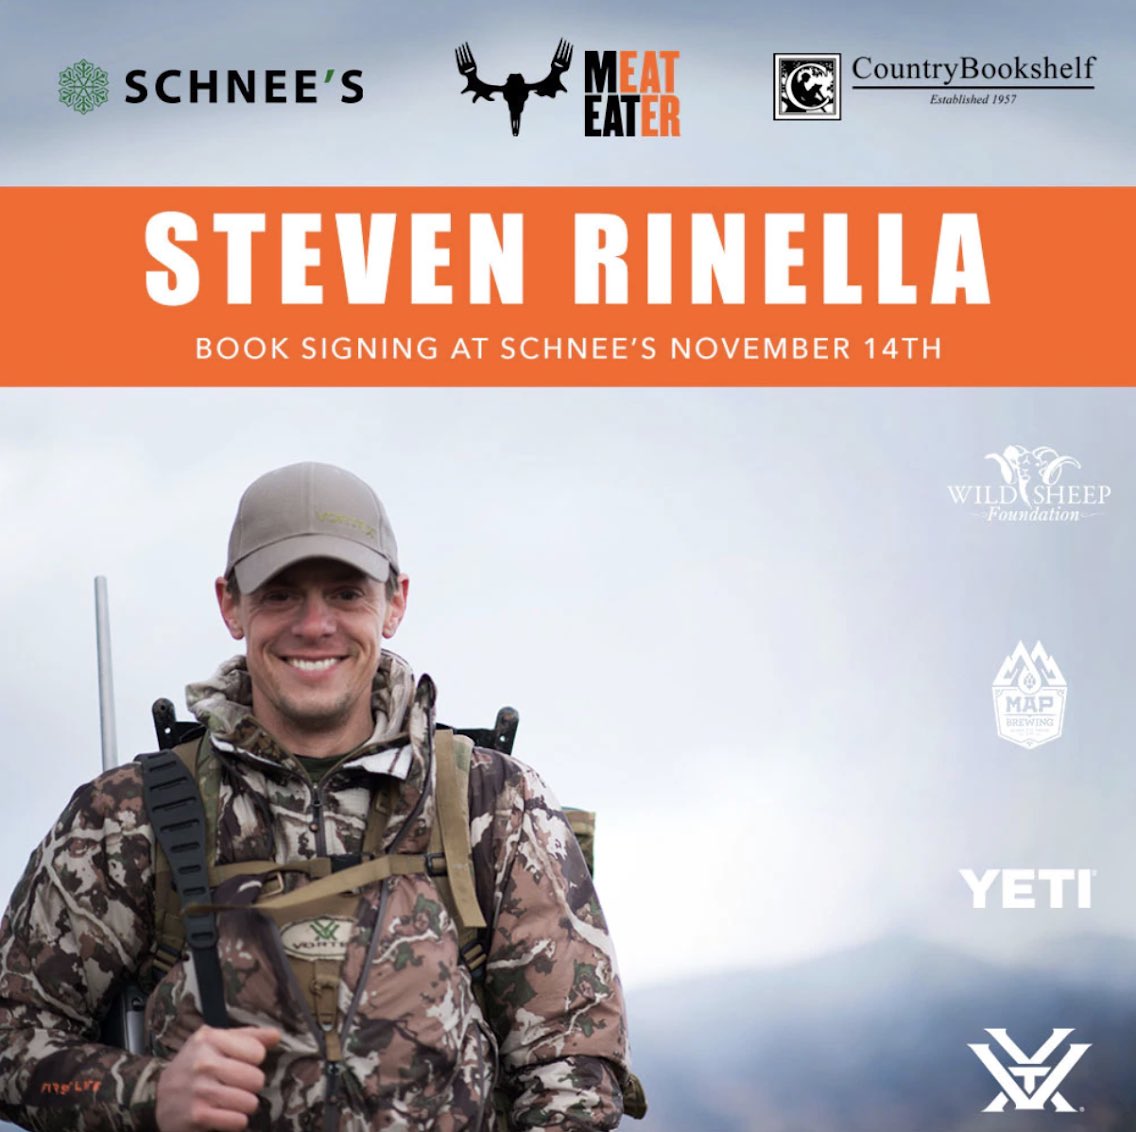 Steven Rinella Book Signing Steven Rinella On Twitter Workout Time For The Meateater Crew